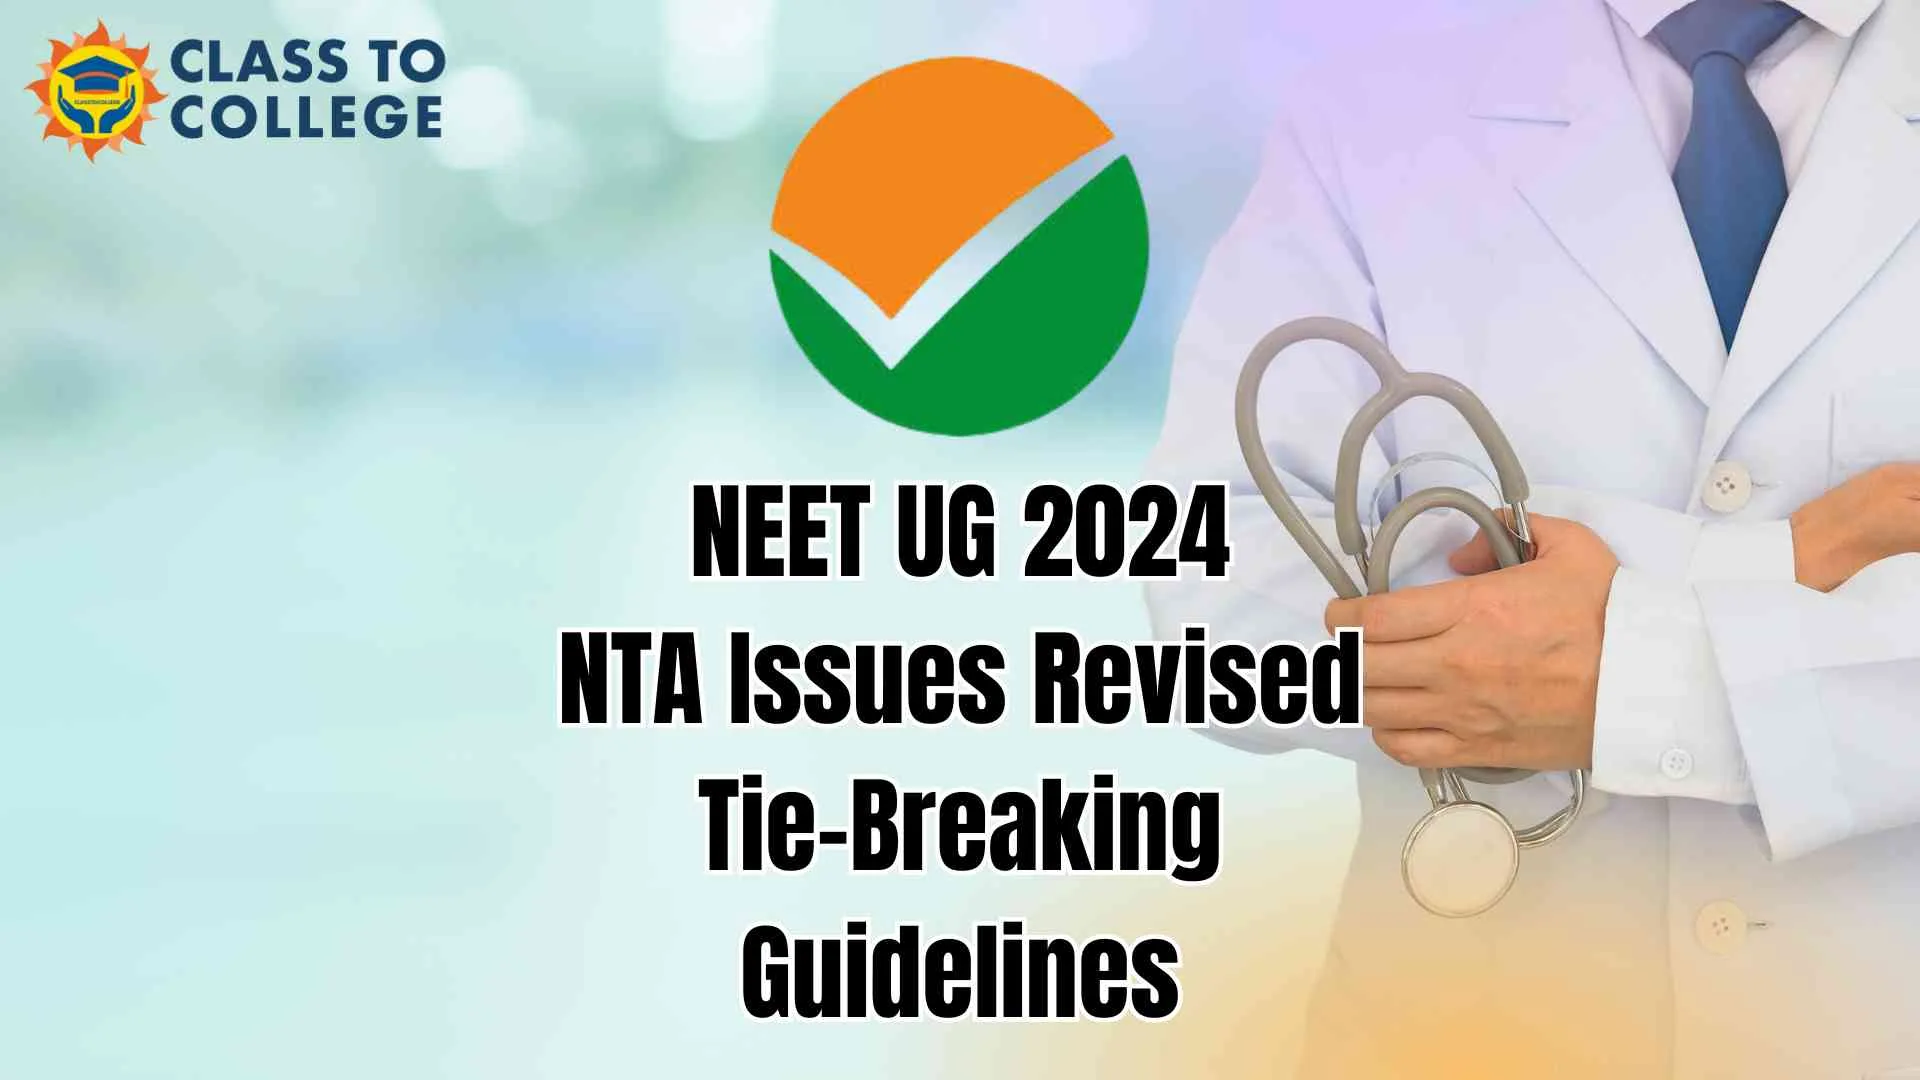 NTA issues revised Guidelines for Tie Breaking Criteria for NEET UG 2024